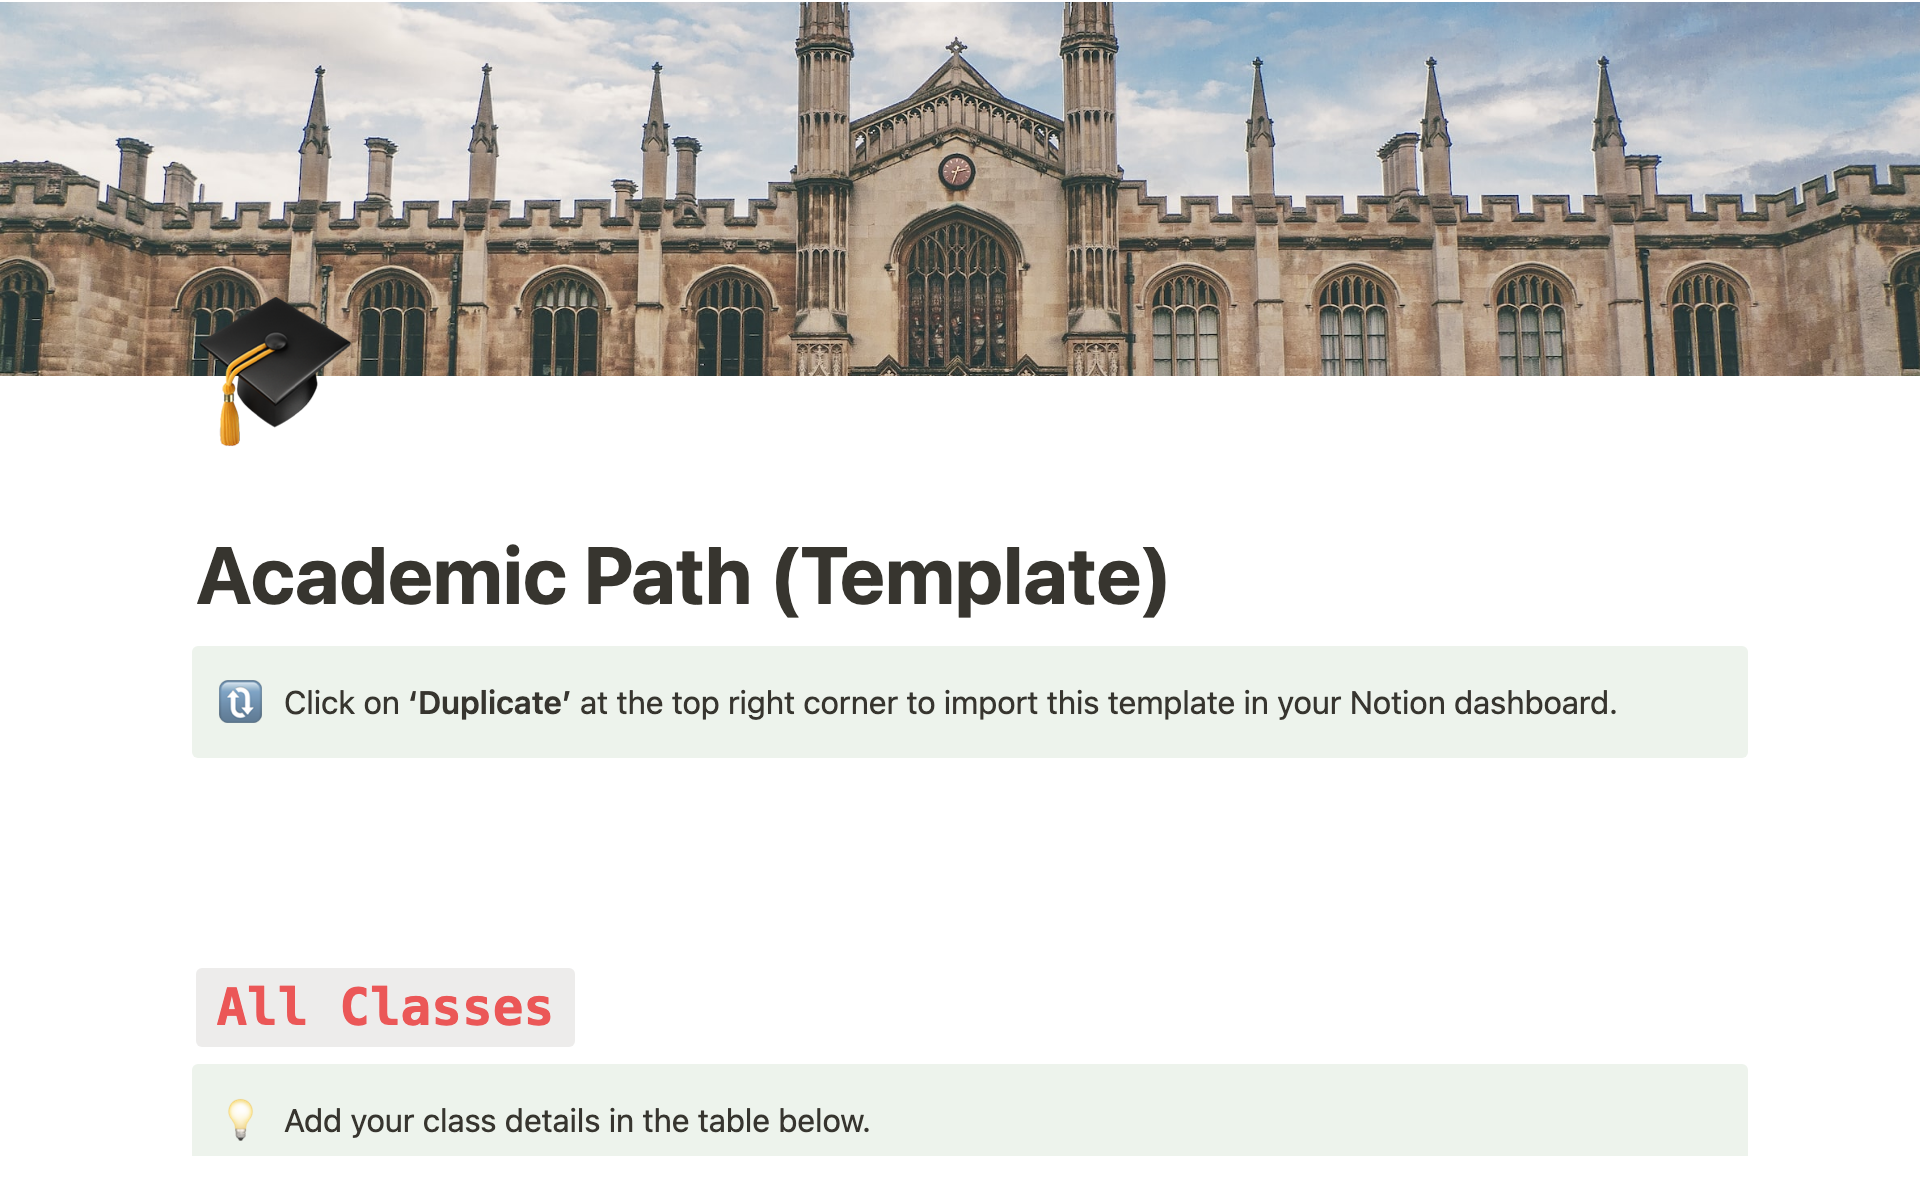 The template is a master dashboard for students to manage courses, class notes and university assignments so students never miss an assignment or exam again.